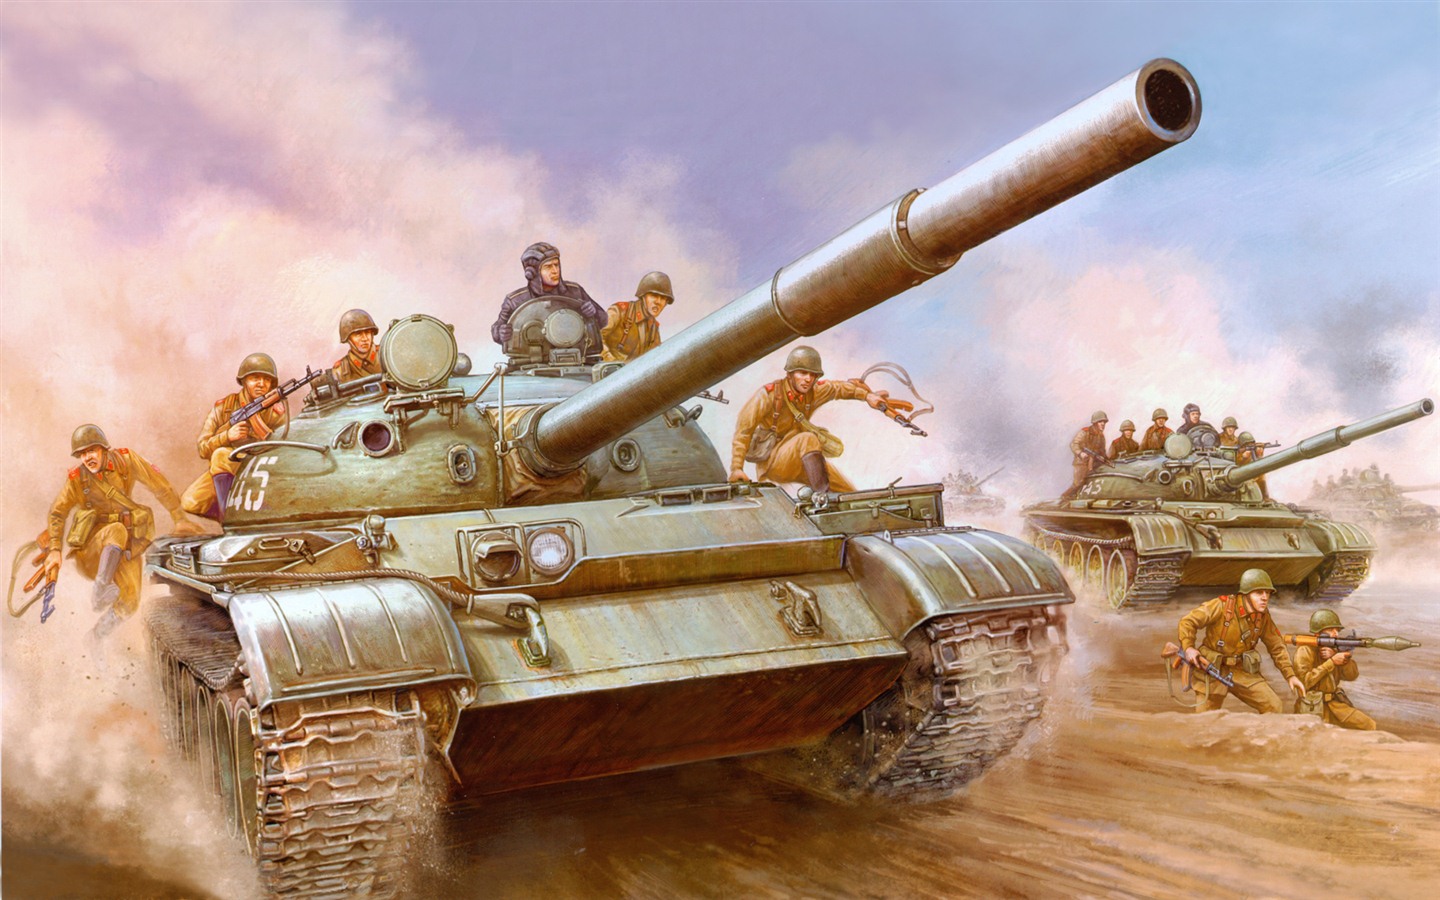 Military tanks, armored HD painting wallpapers #16 - 1440x900